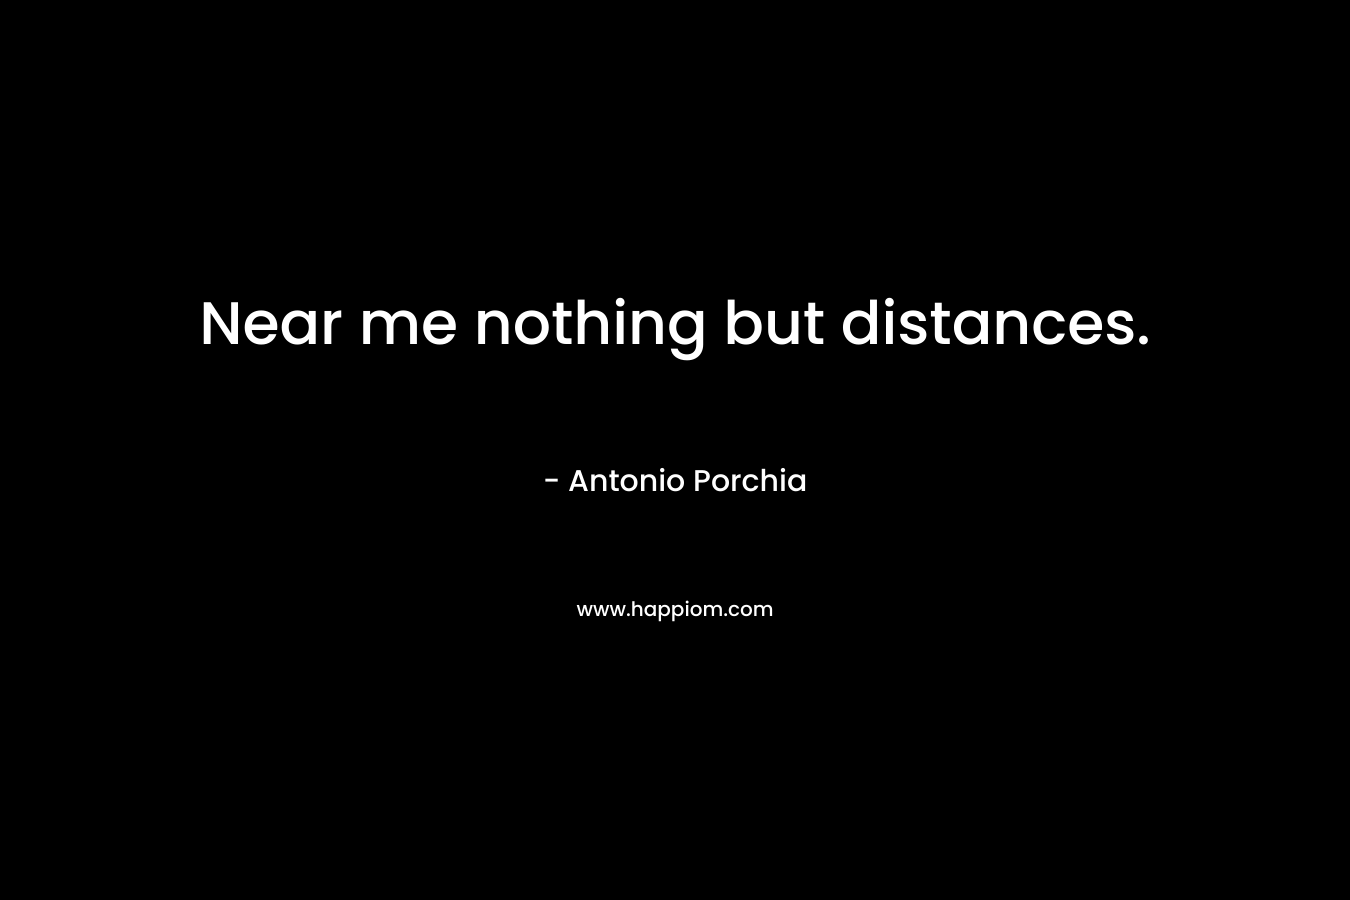 Near me nothing but distances.